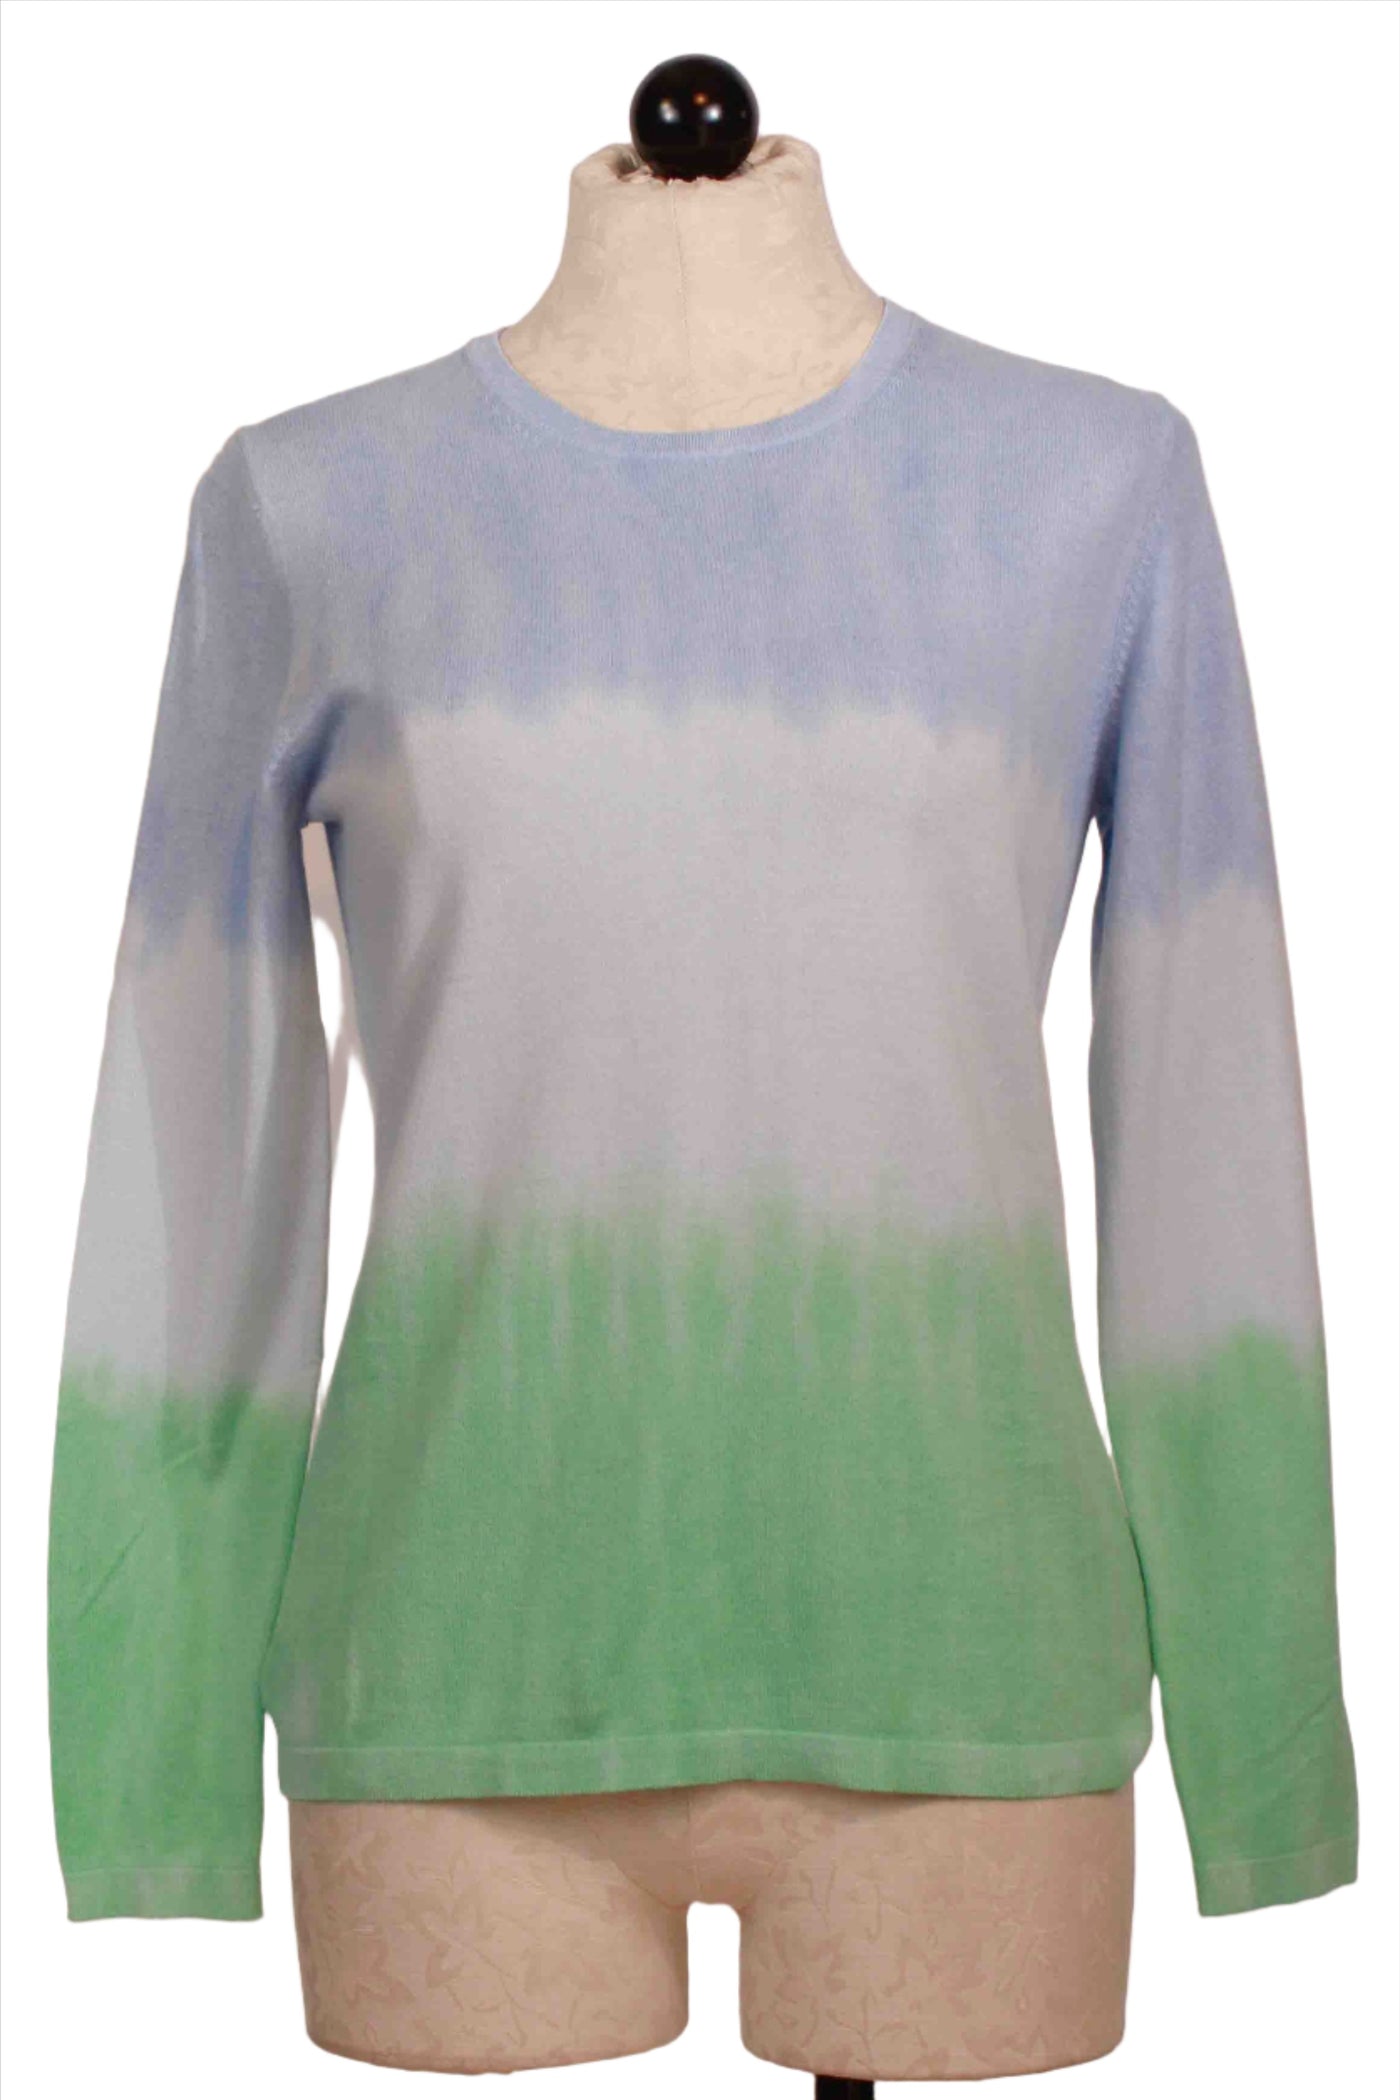 Rain Combo Colored Dip Dye Crew Neck Sweater with Striations by Alashan Cashmere